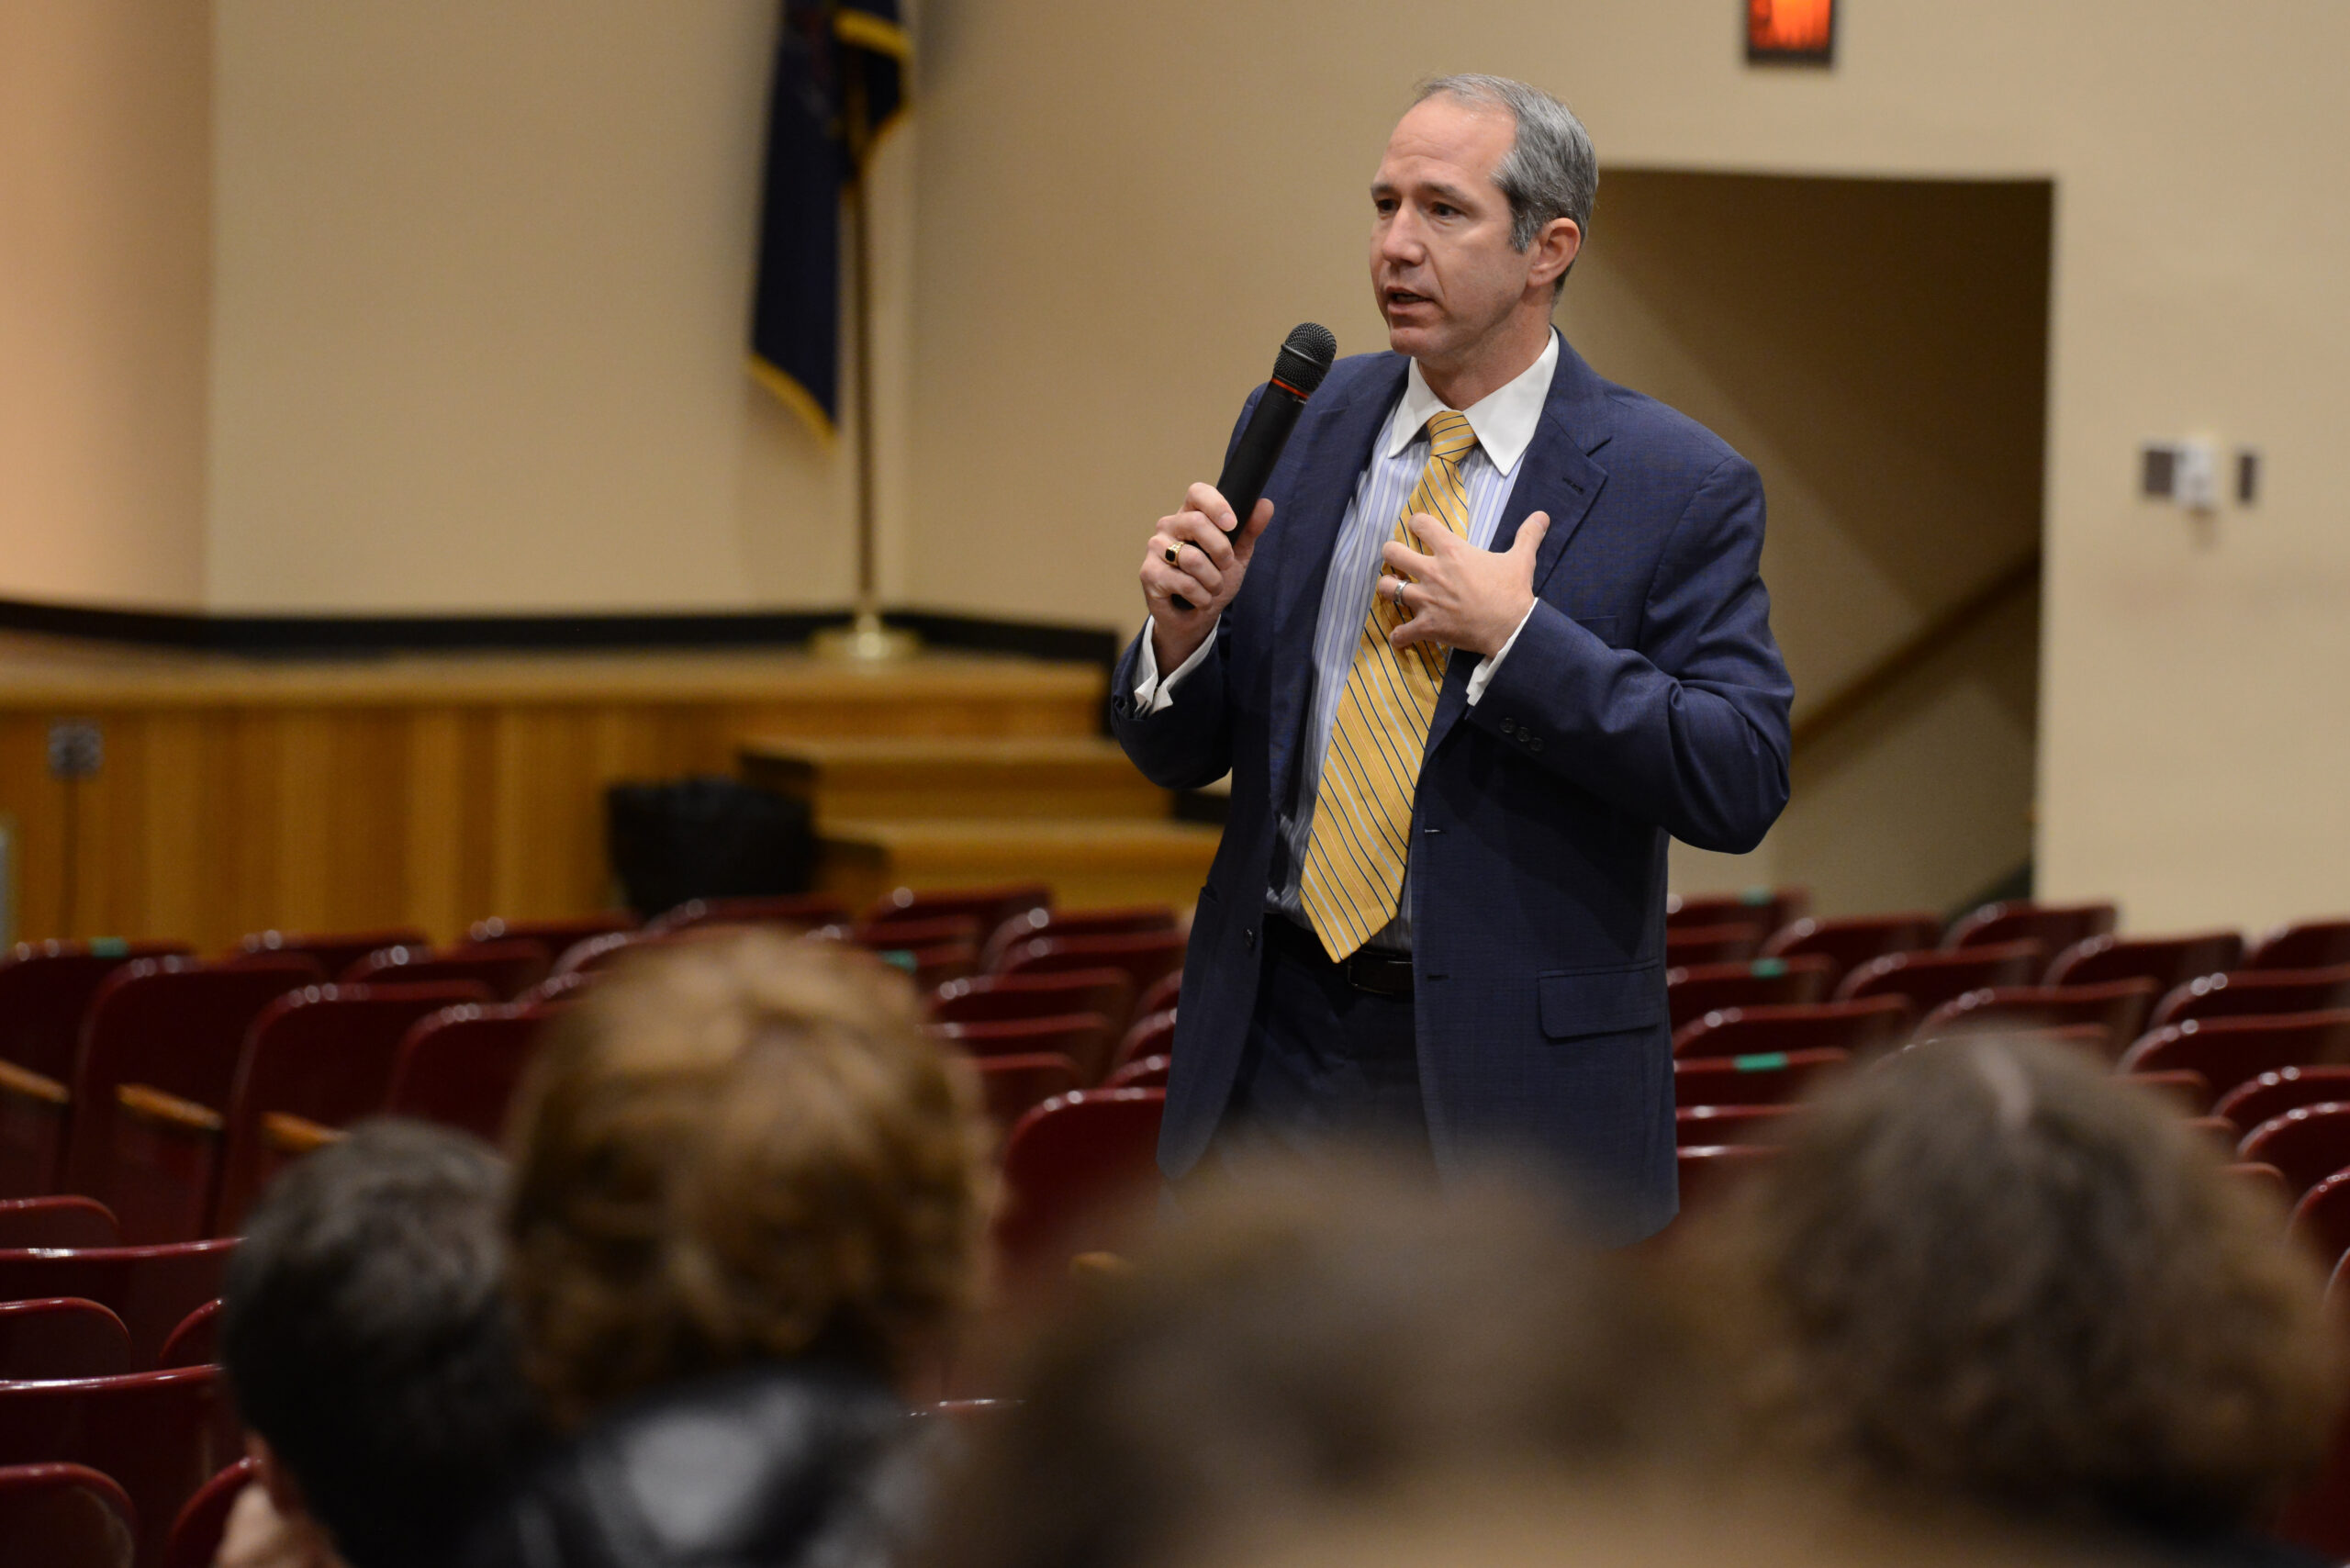 Indiana County’s District Attorney visits IHS